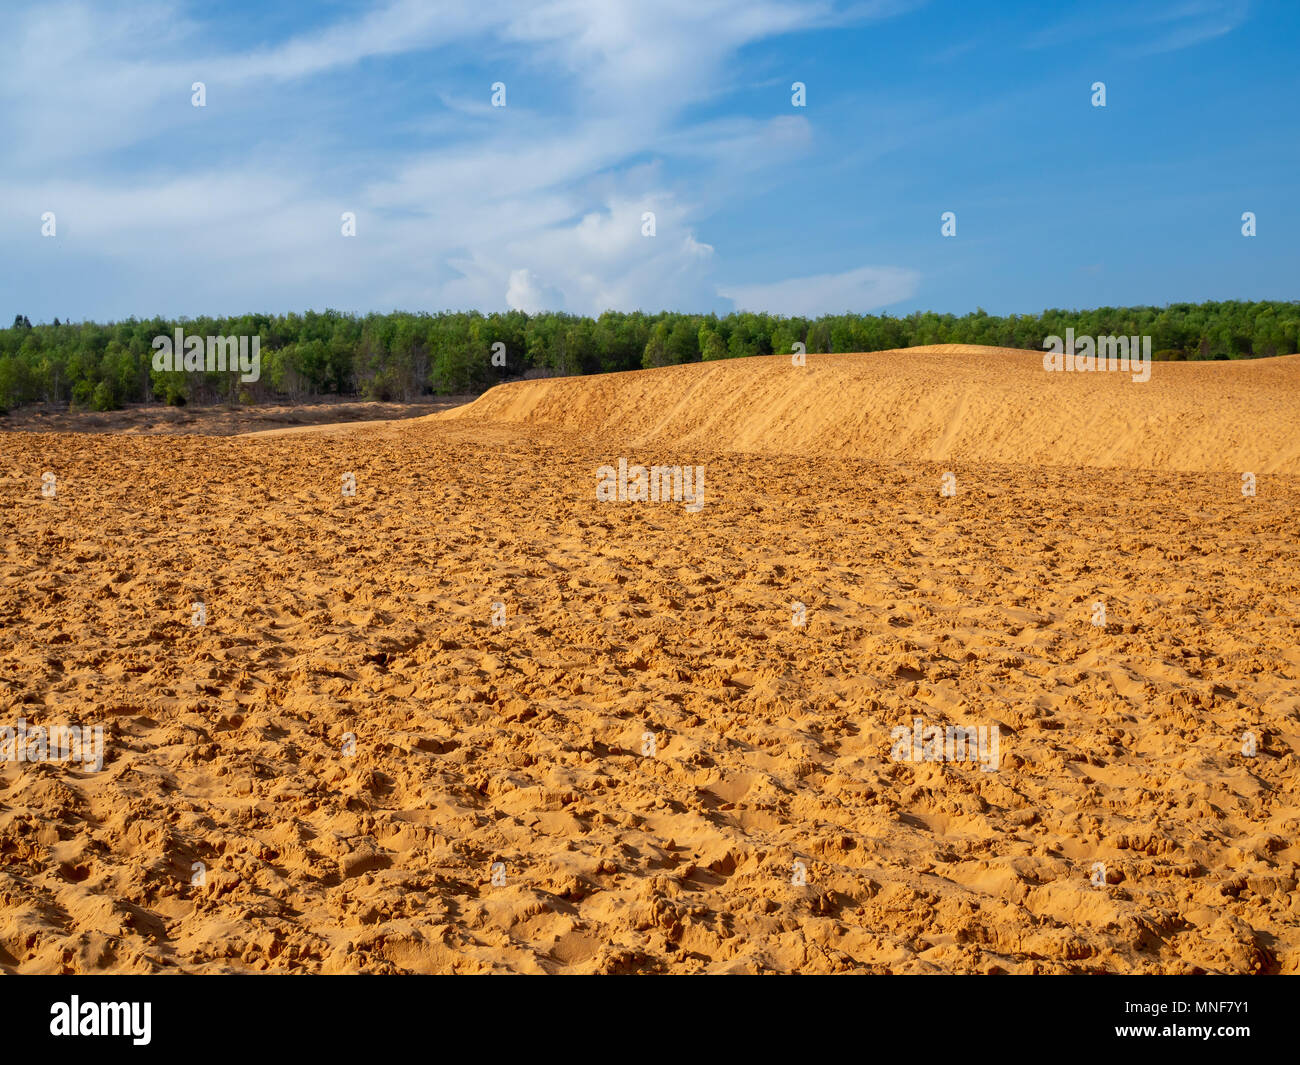 Bluse Sky High Resolution Stock Photography and Images - Alamy